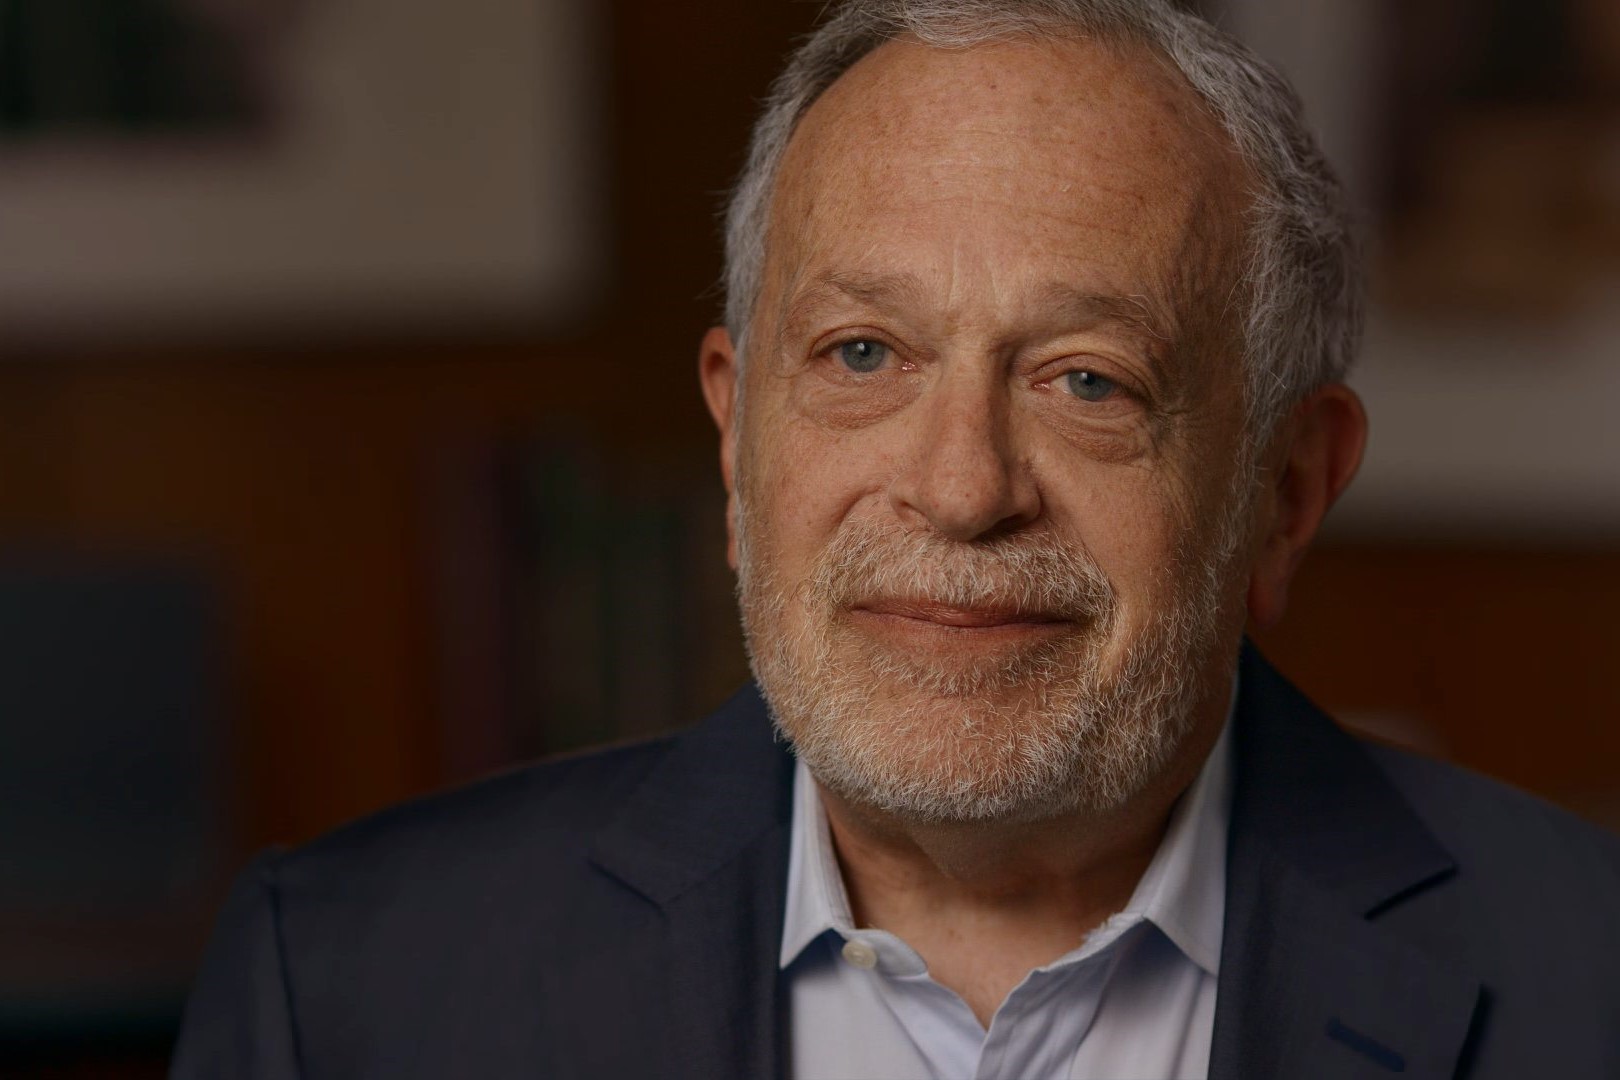 9 Captivating Facts About Robert Reich - Facts.net